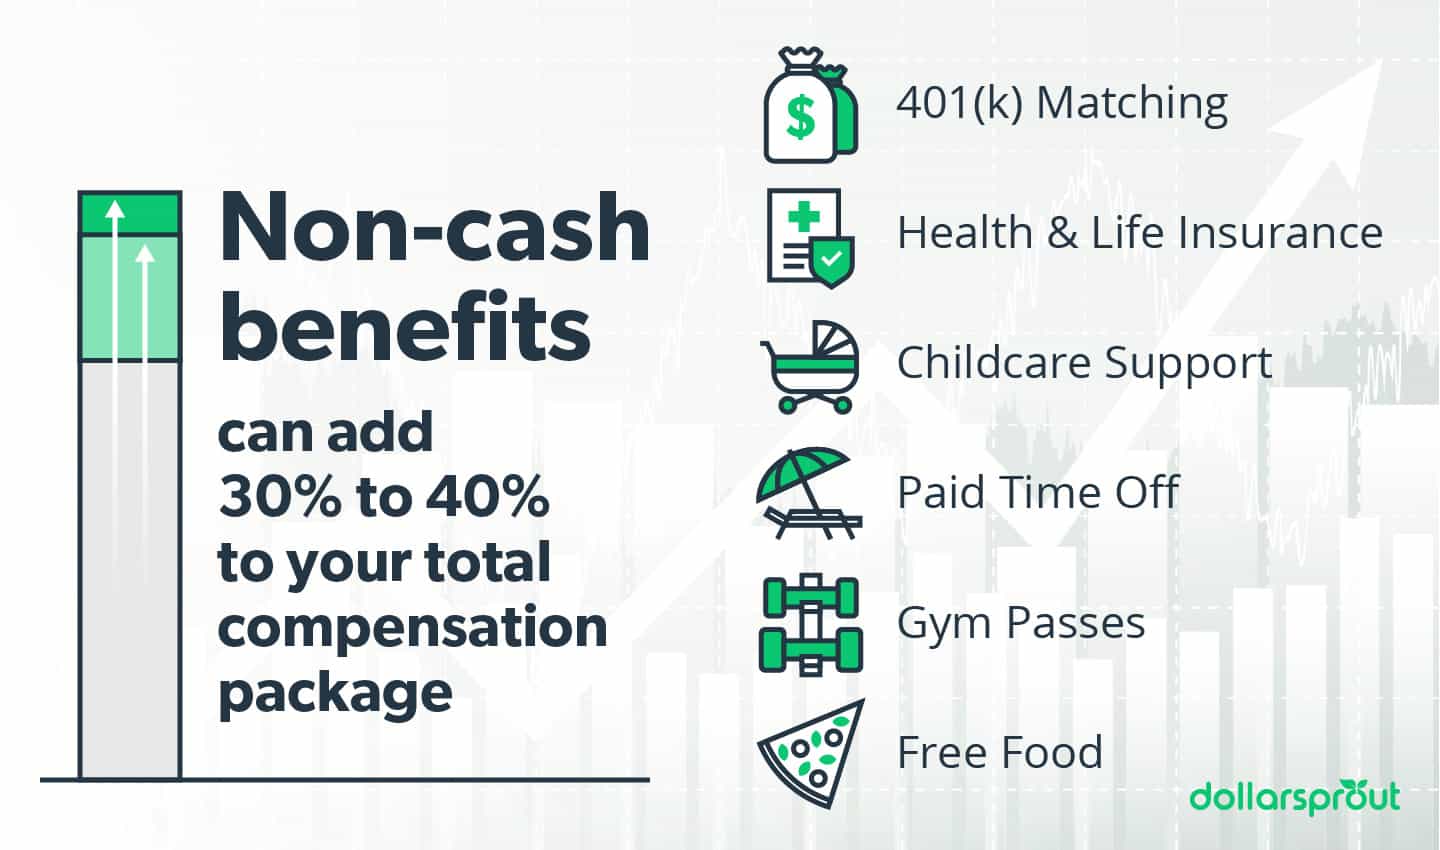 Non-cash benefits can add 30 to 40 percent to your compensation